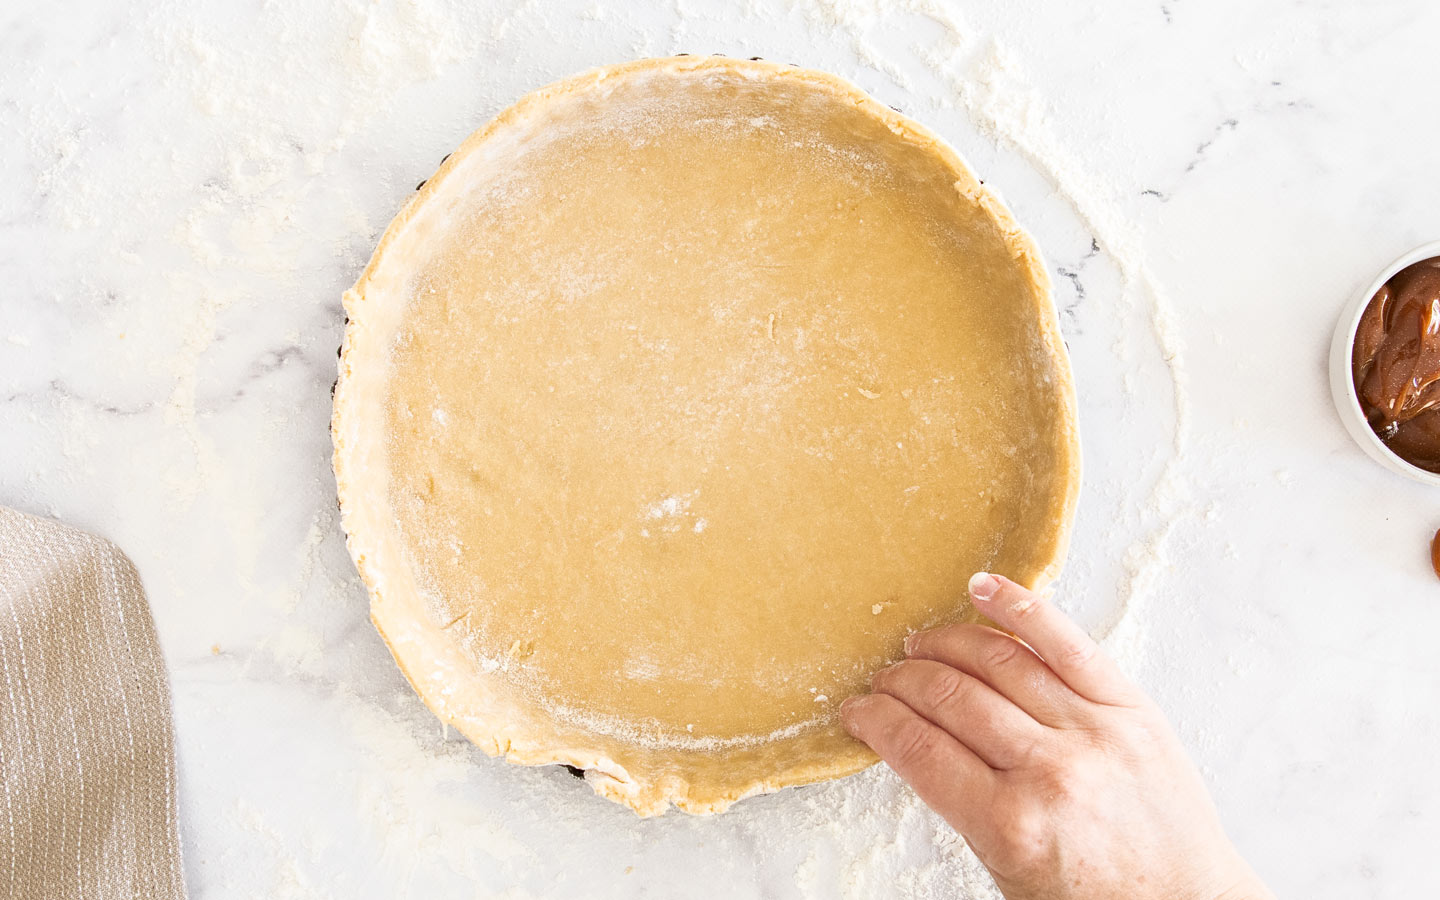 Pressing the pastry into the tart pan.